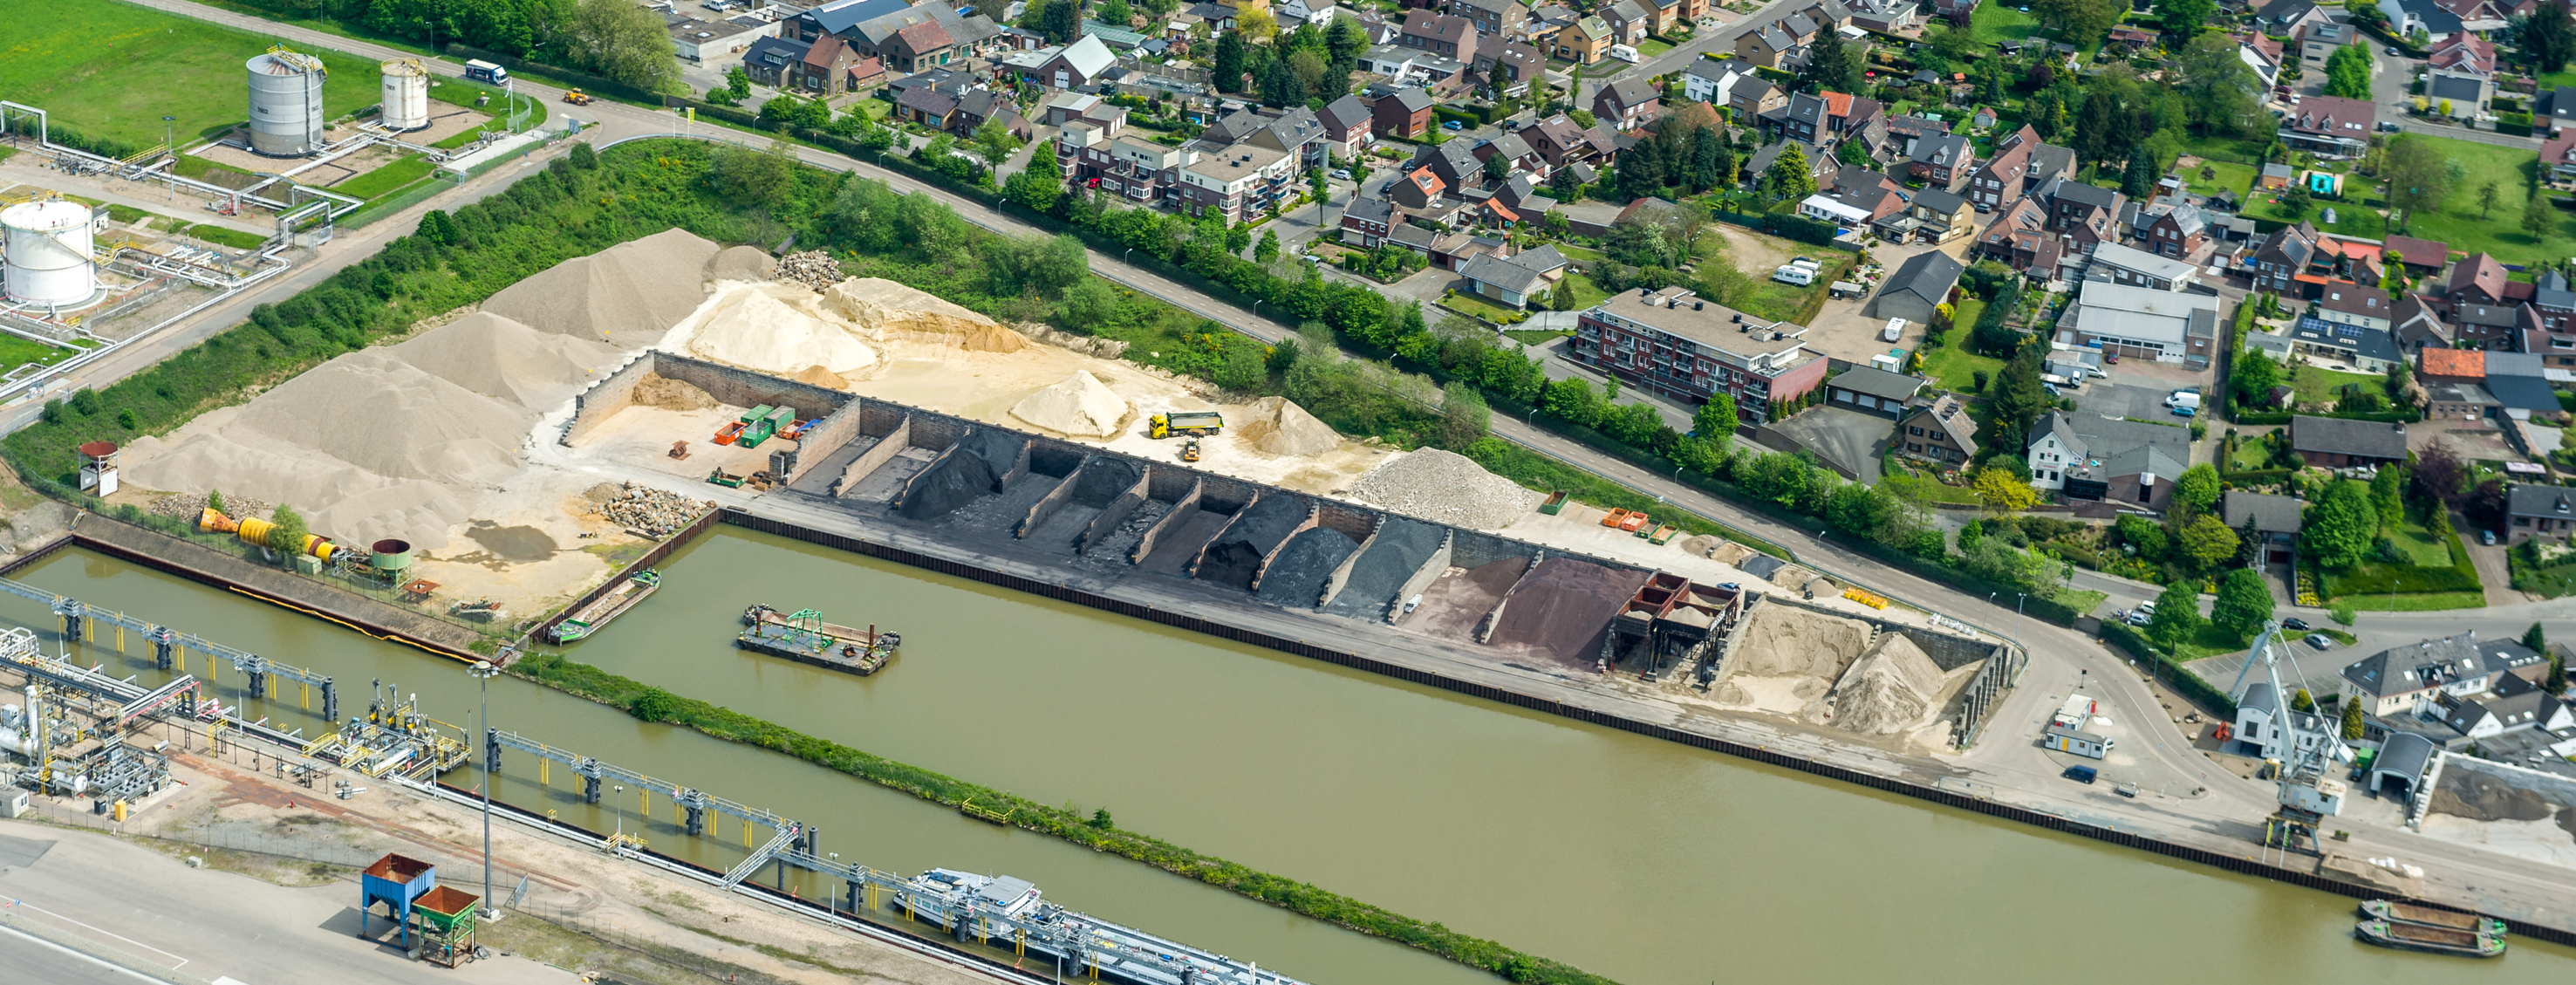 Storage and transport of sand and gravel at harbour Stein, aerial view